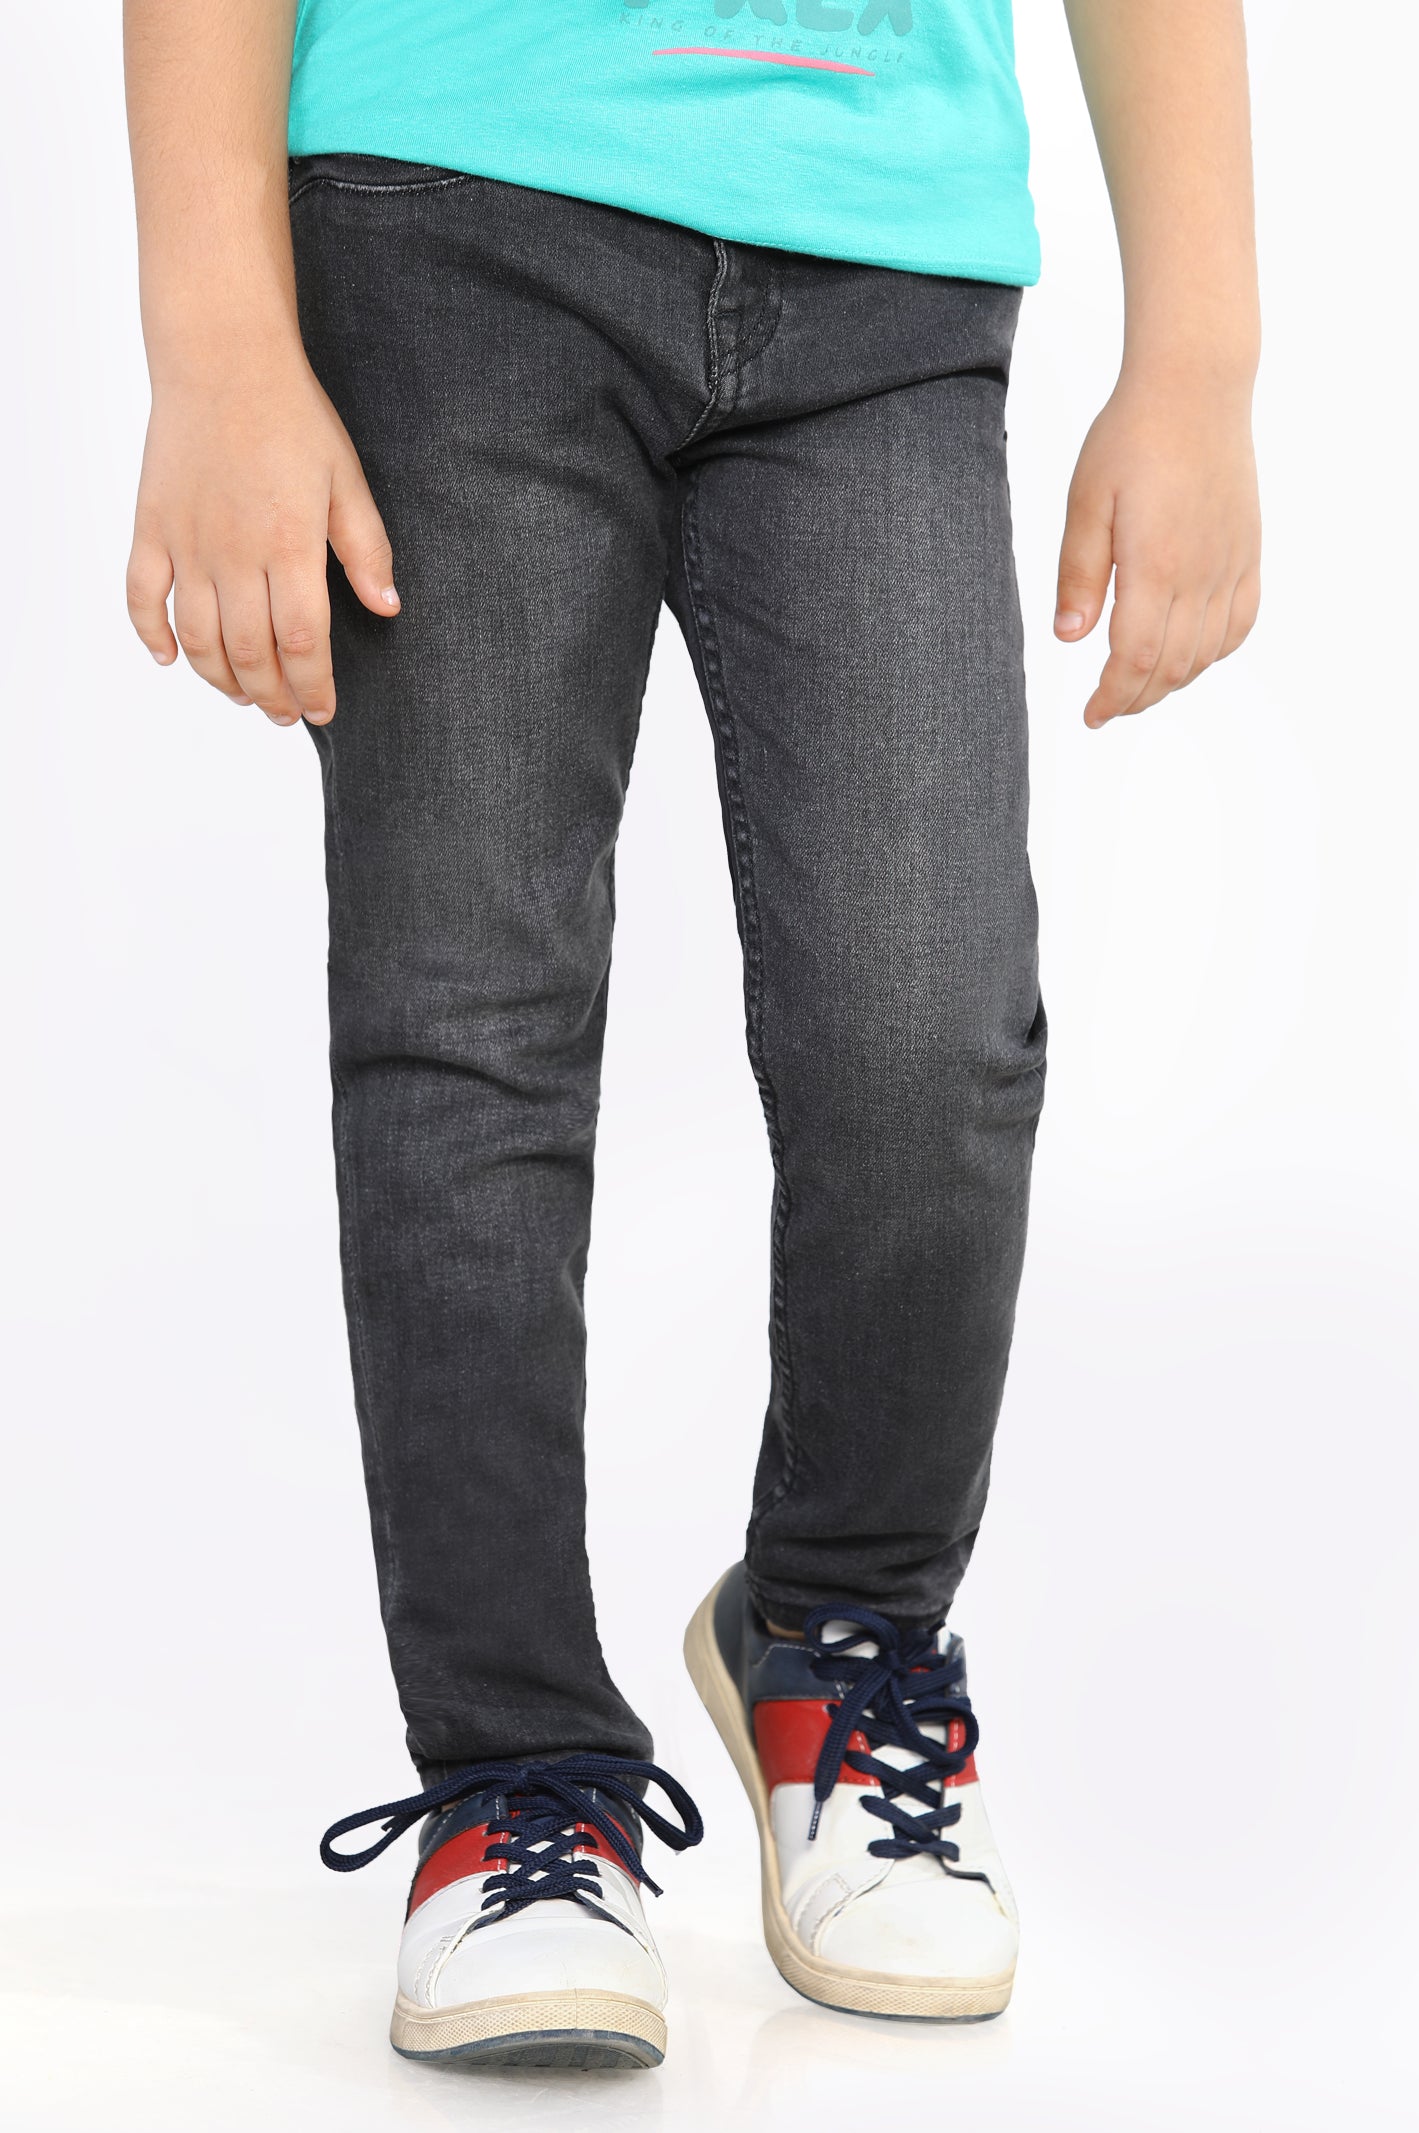 Grey Slim Fit Denim Jeans From Diners